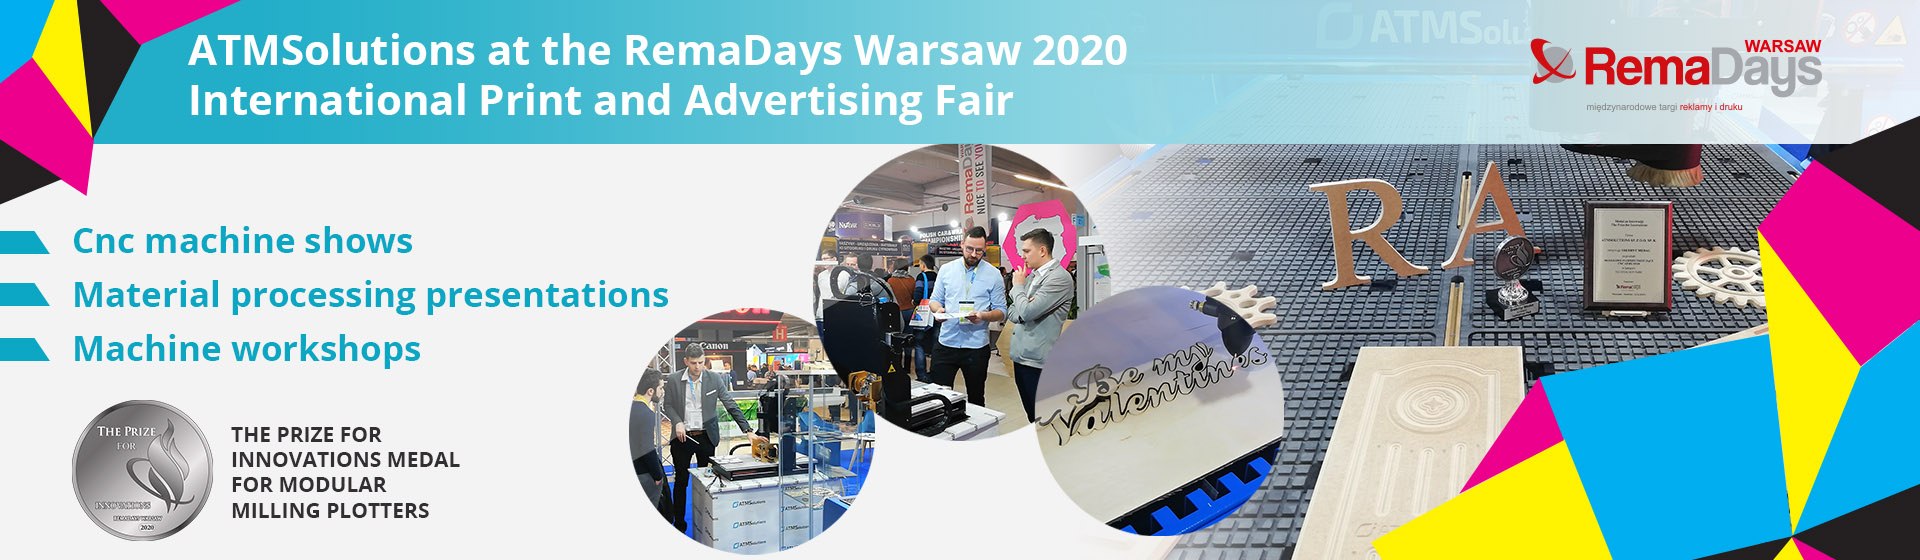 ATMSolutions at the RemaDays Warsaw 2020 International Print and Advertising Fair